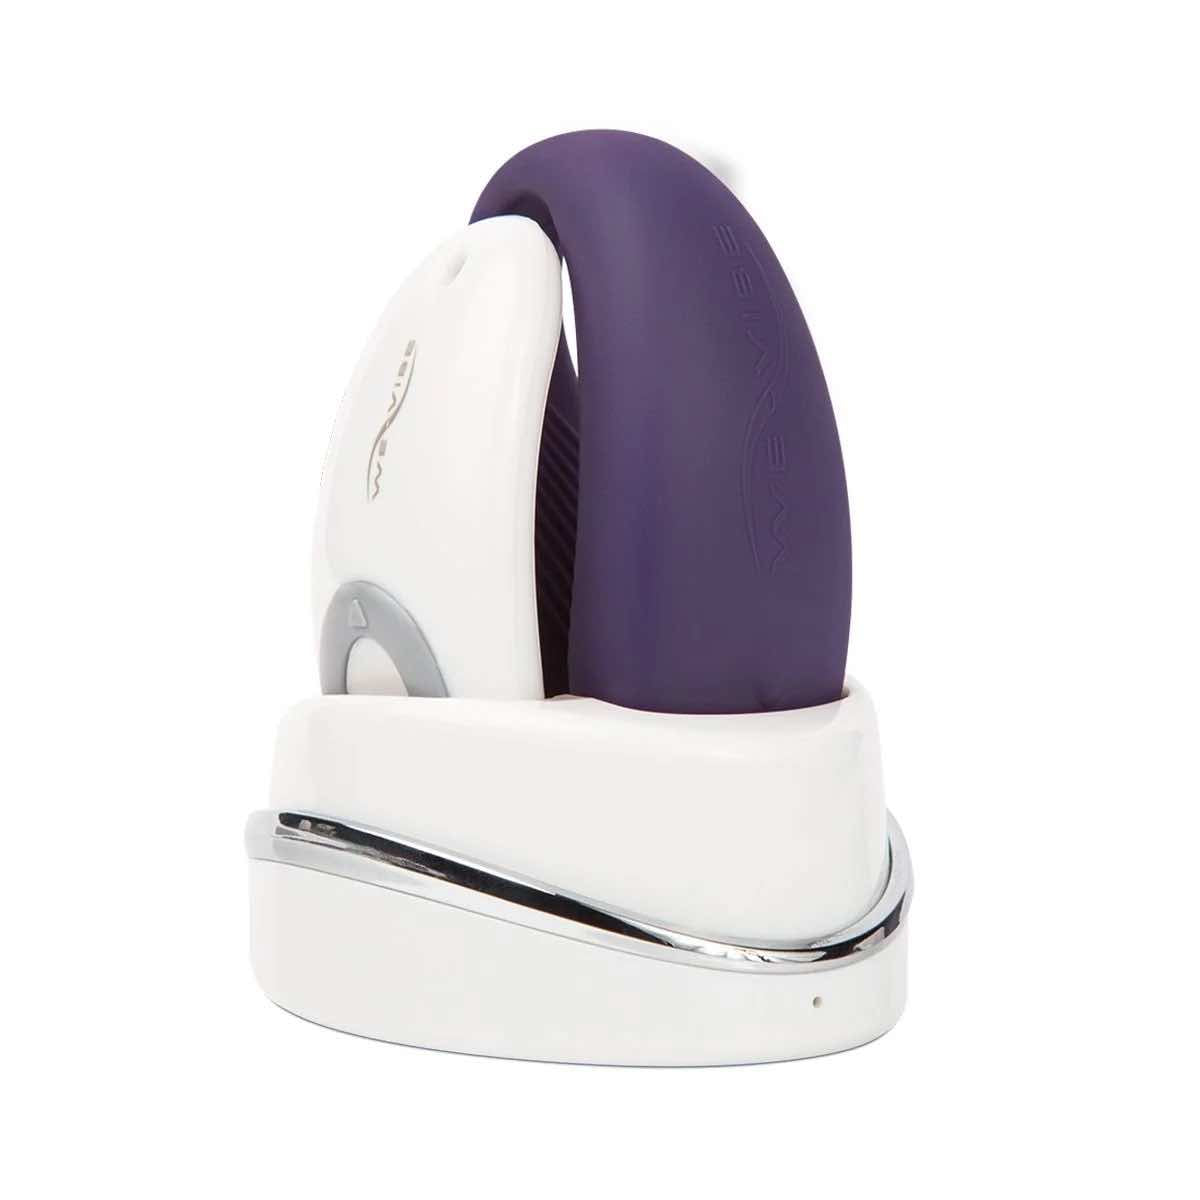 The purple We-Vibe Sync with its remote and charging base.